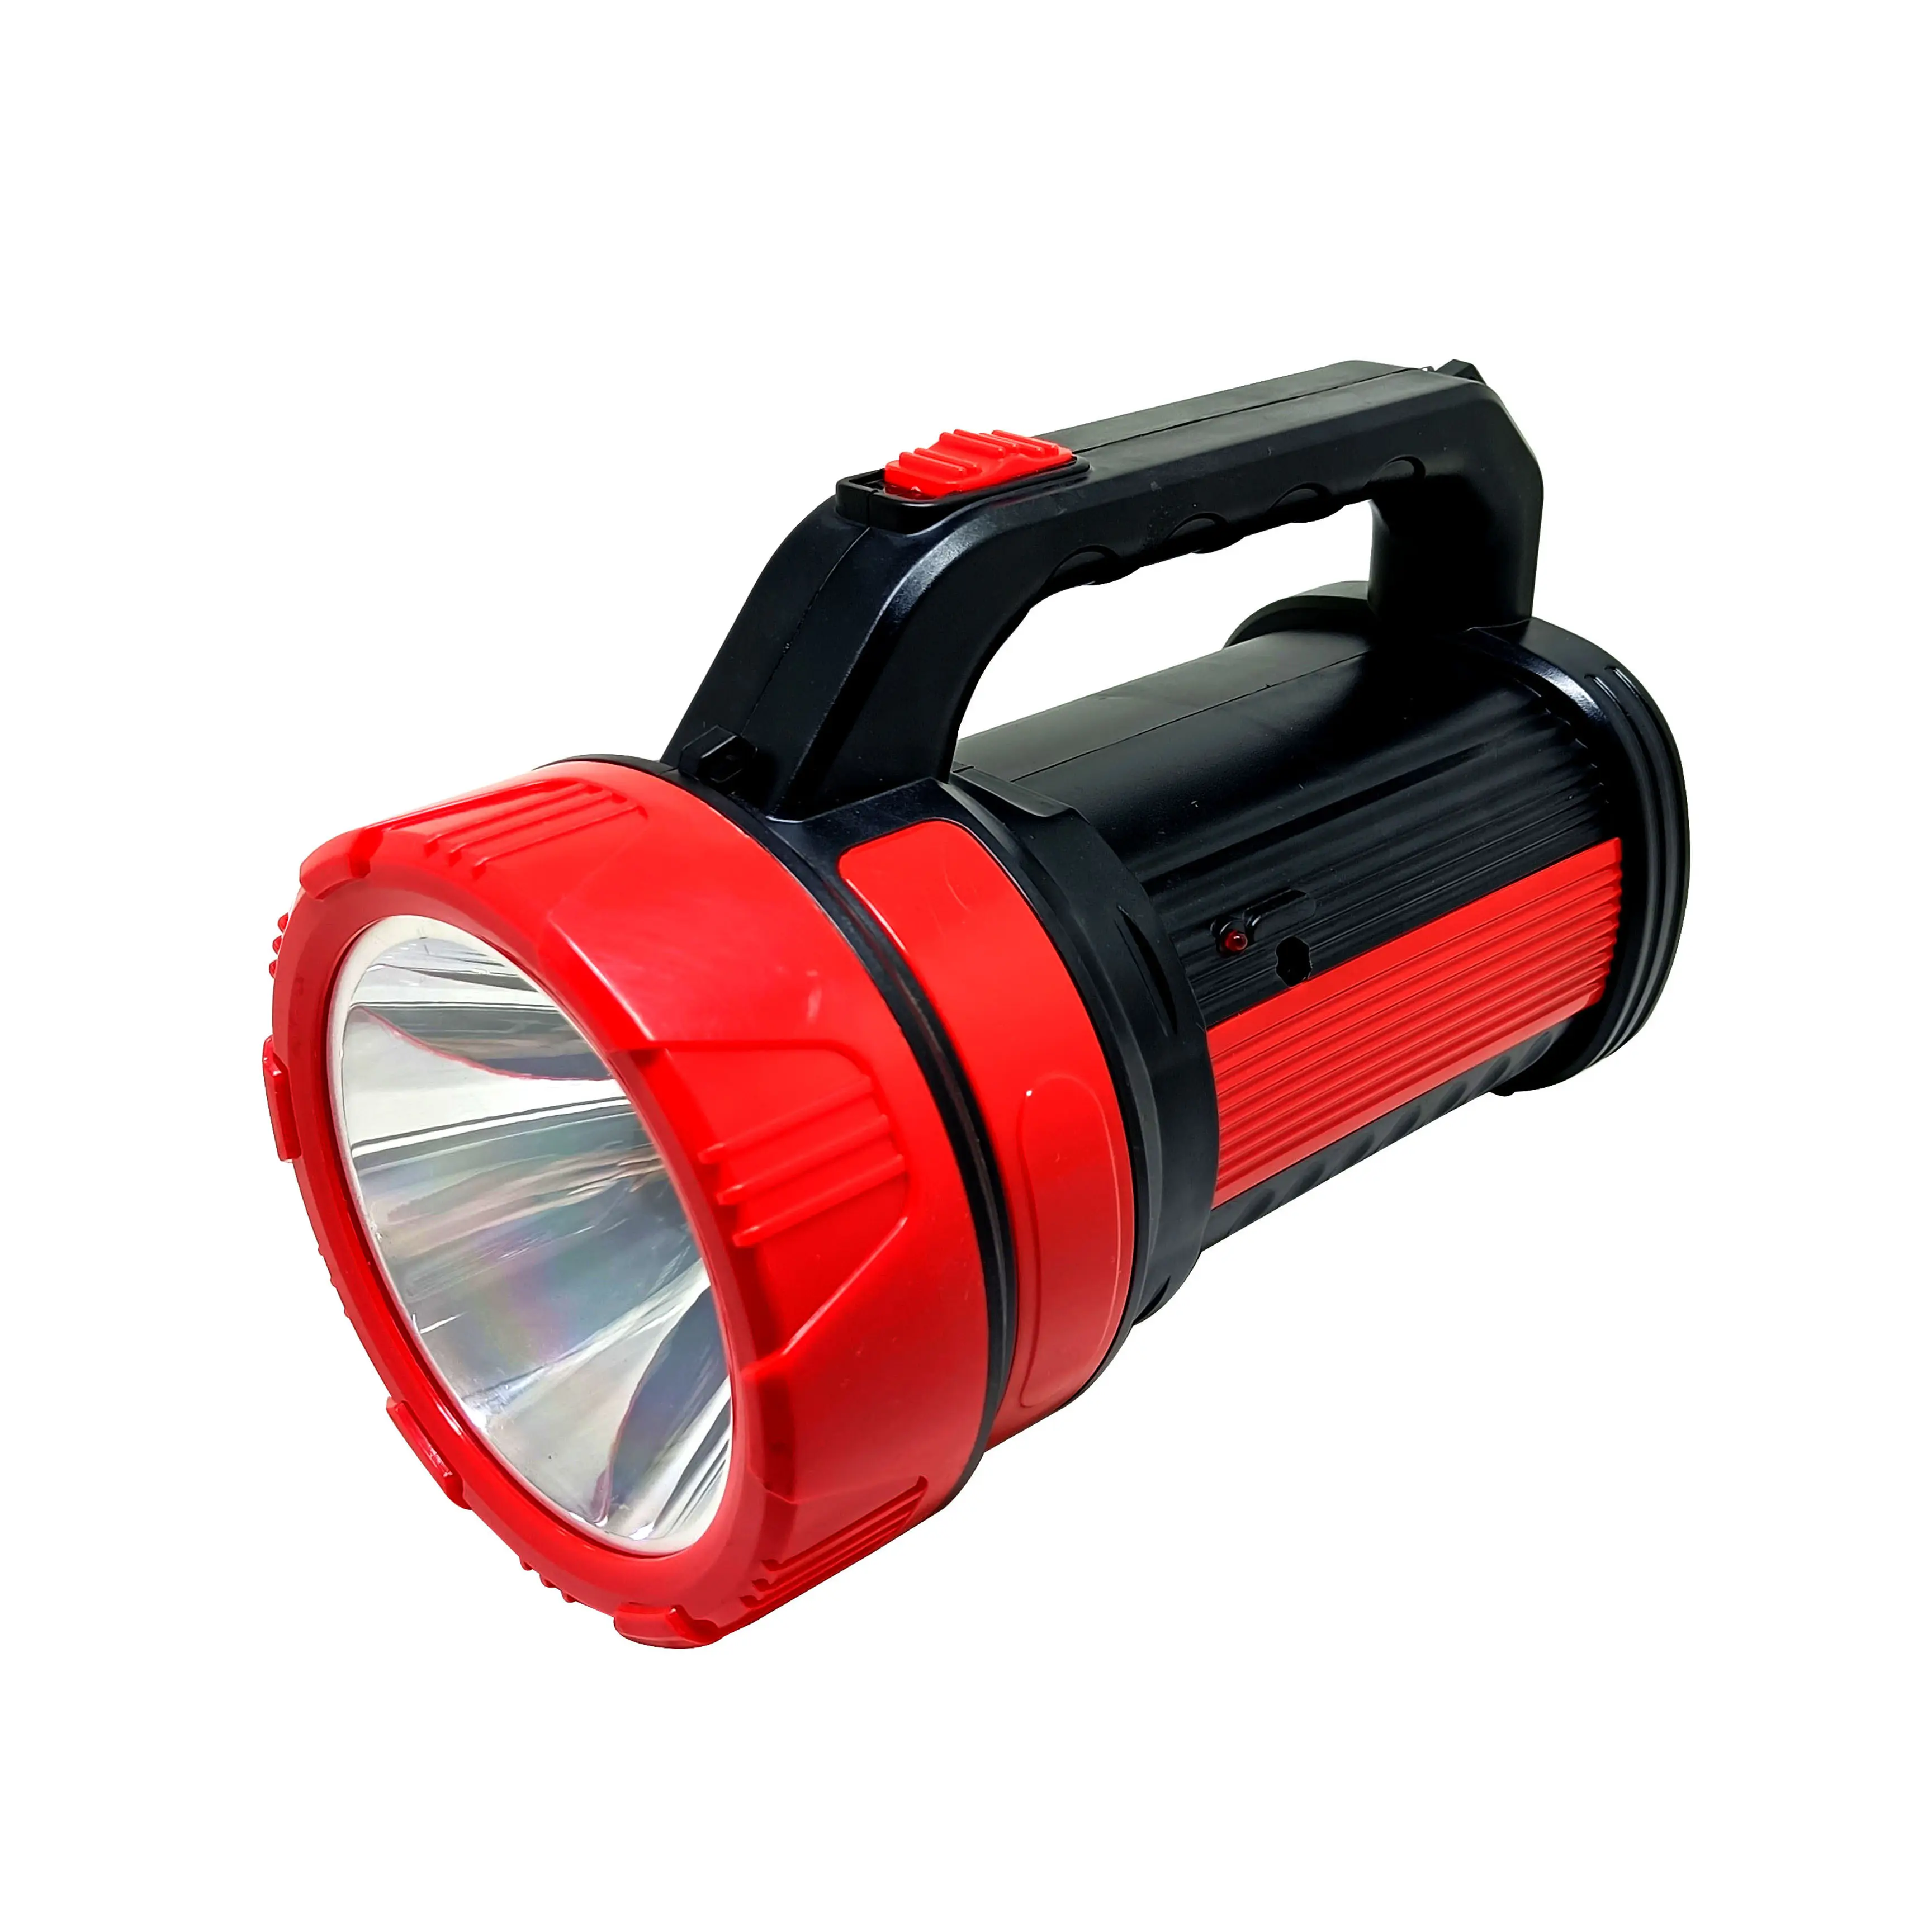 Manufacturers selling outdoor led light lamp hand pressure generating light long shots the searchlight patrol emergency light